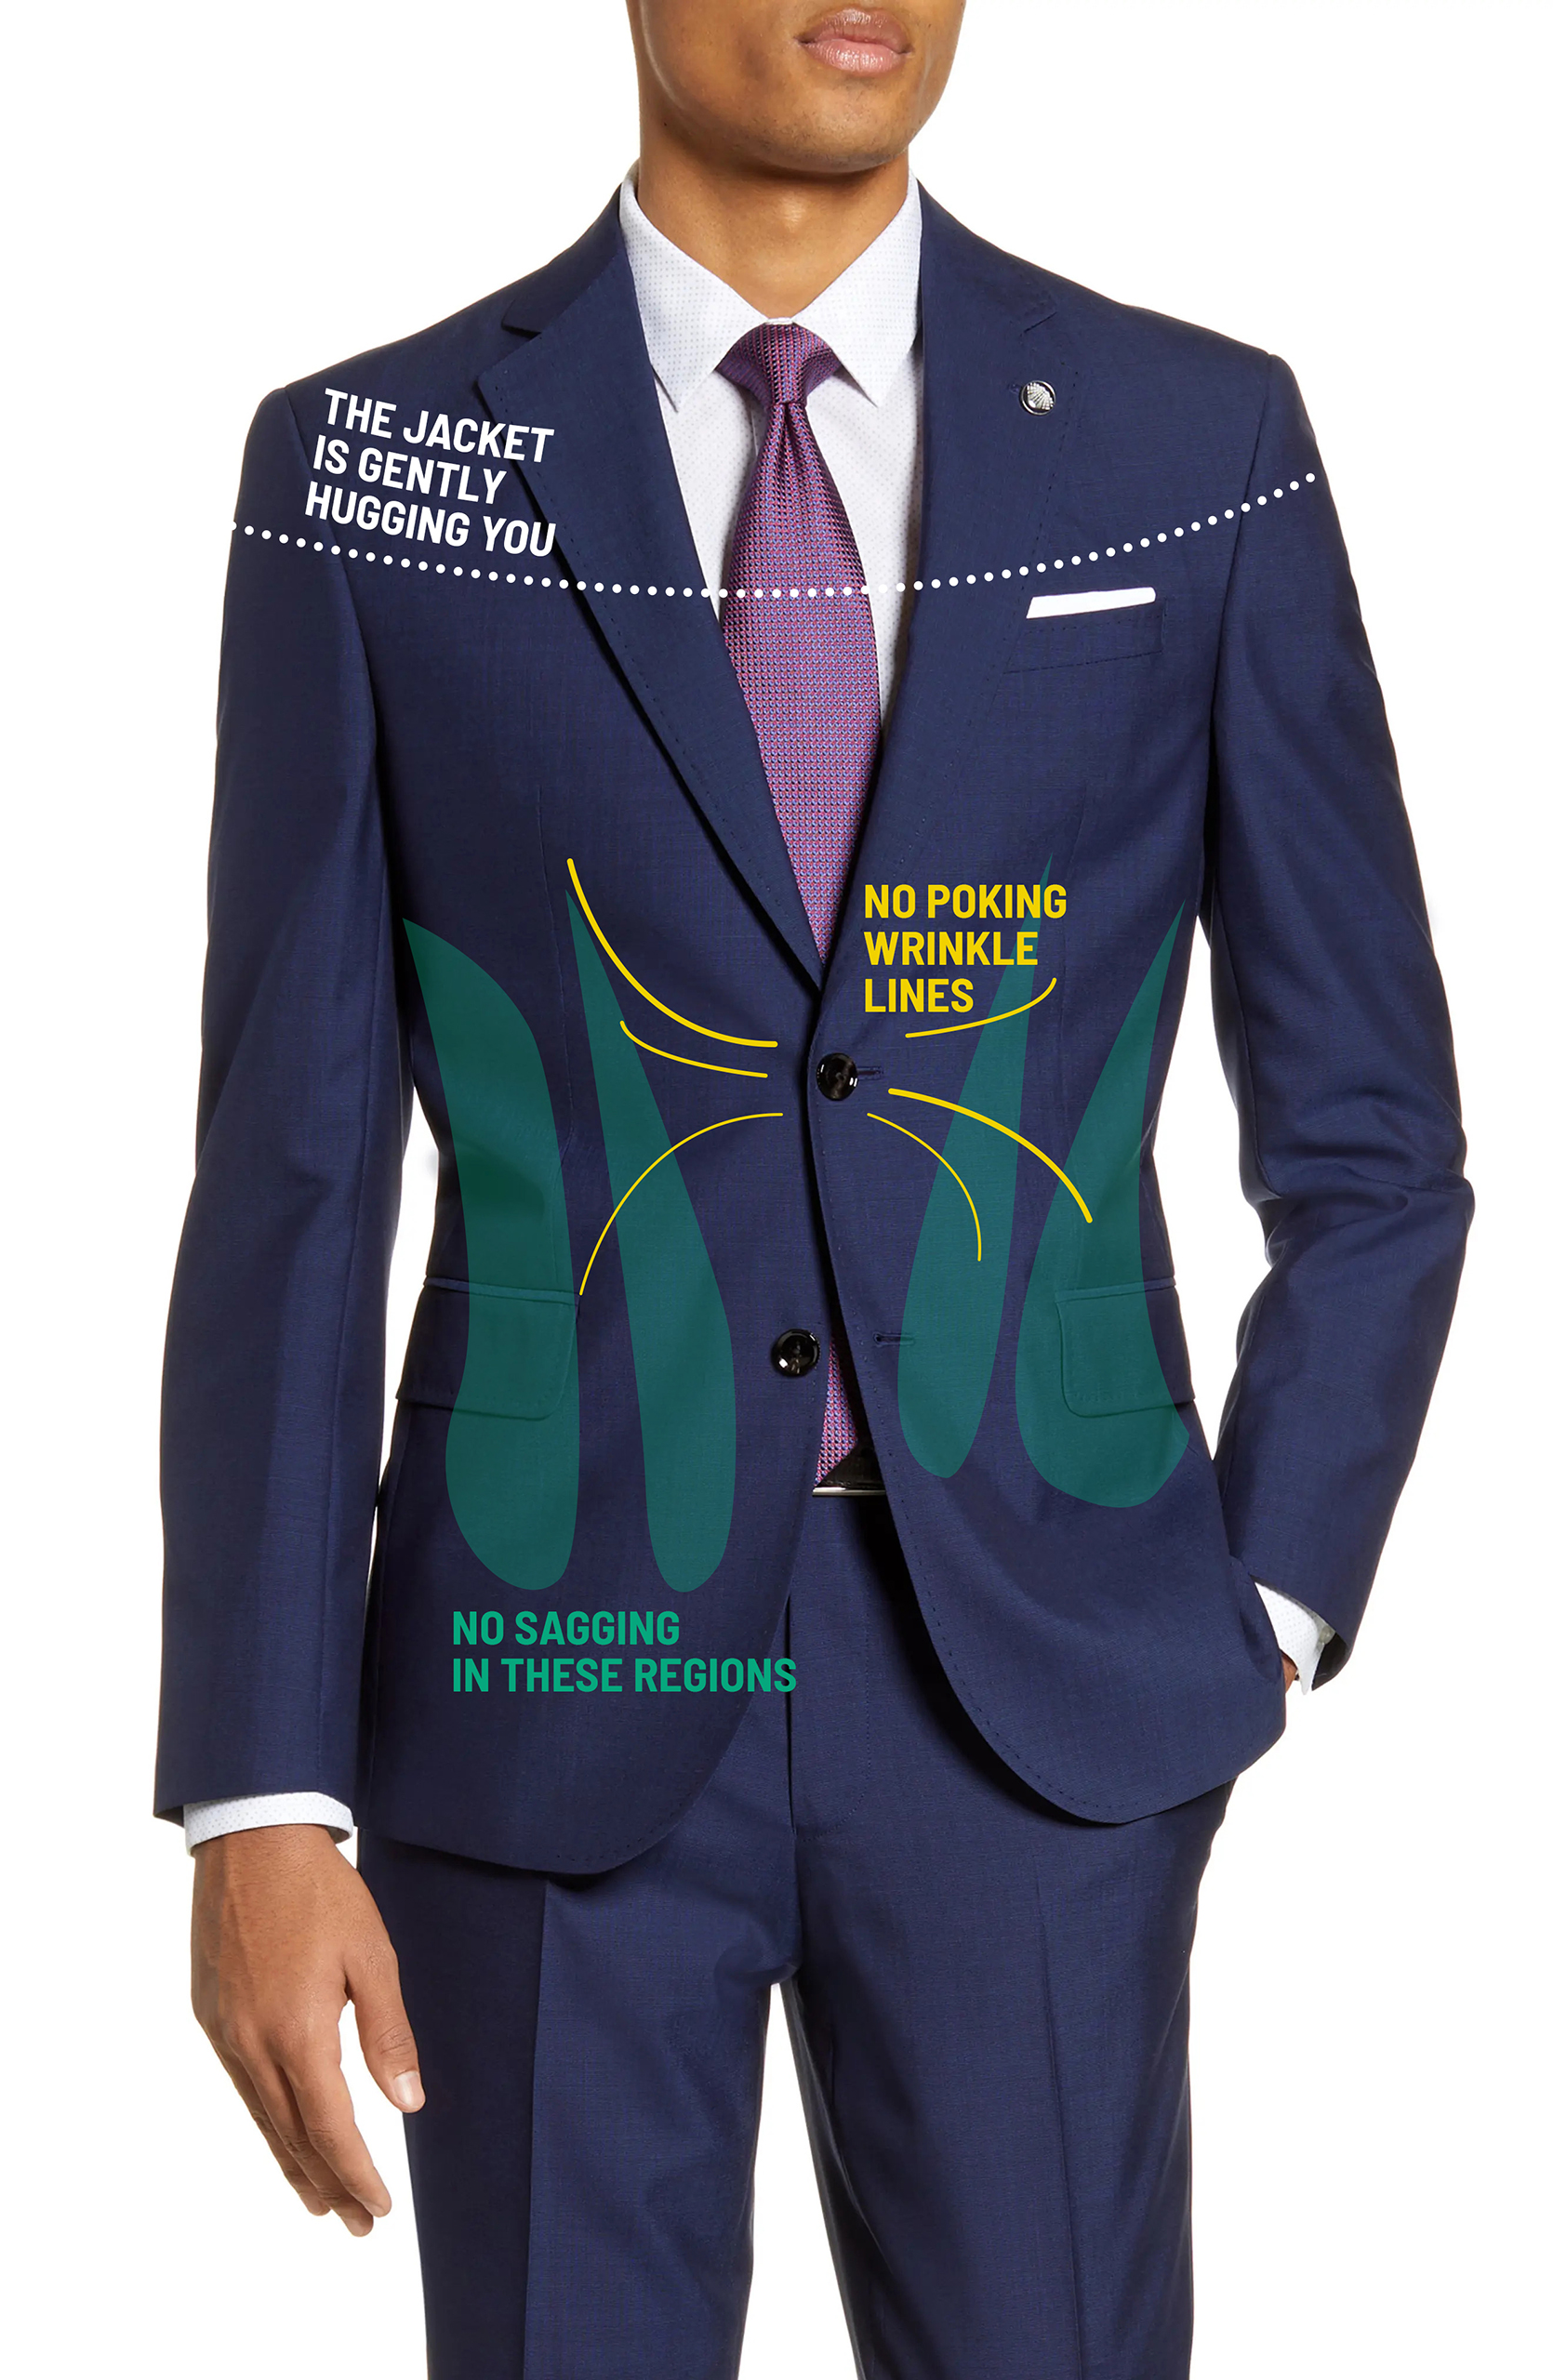 A suit should fit properly if it has a flawless jacket closure 